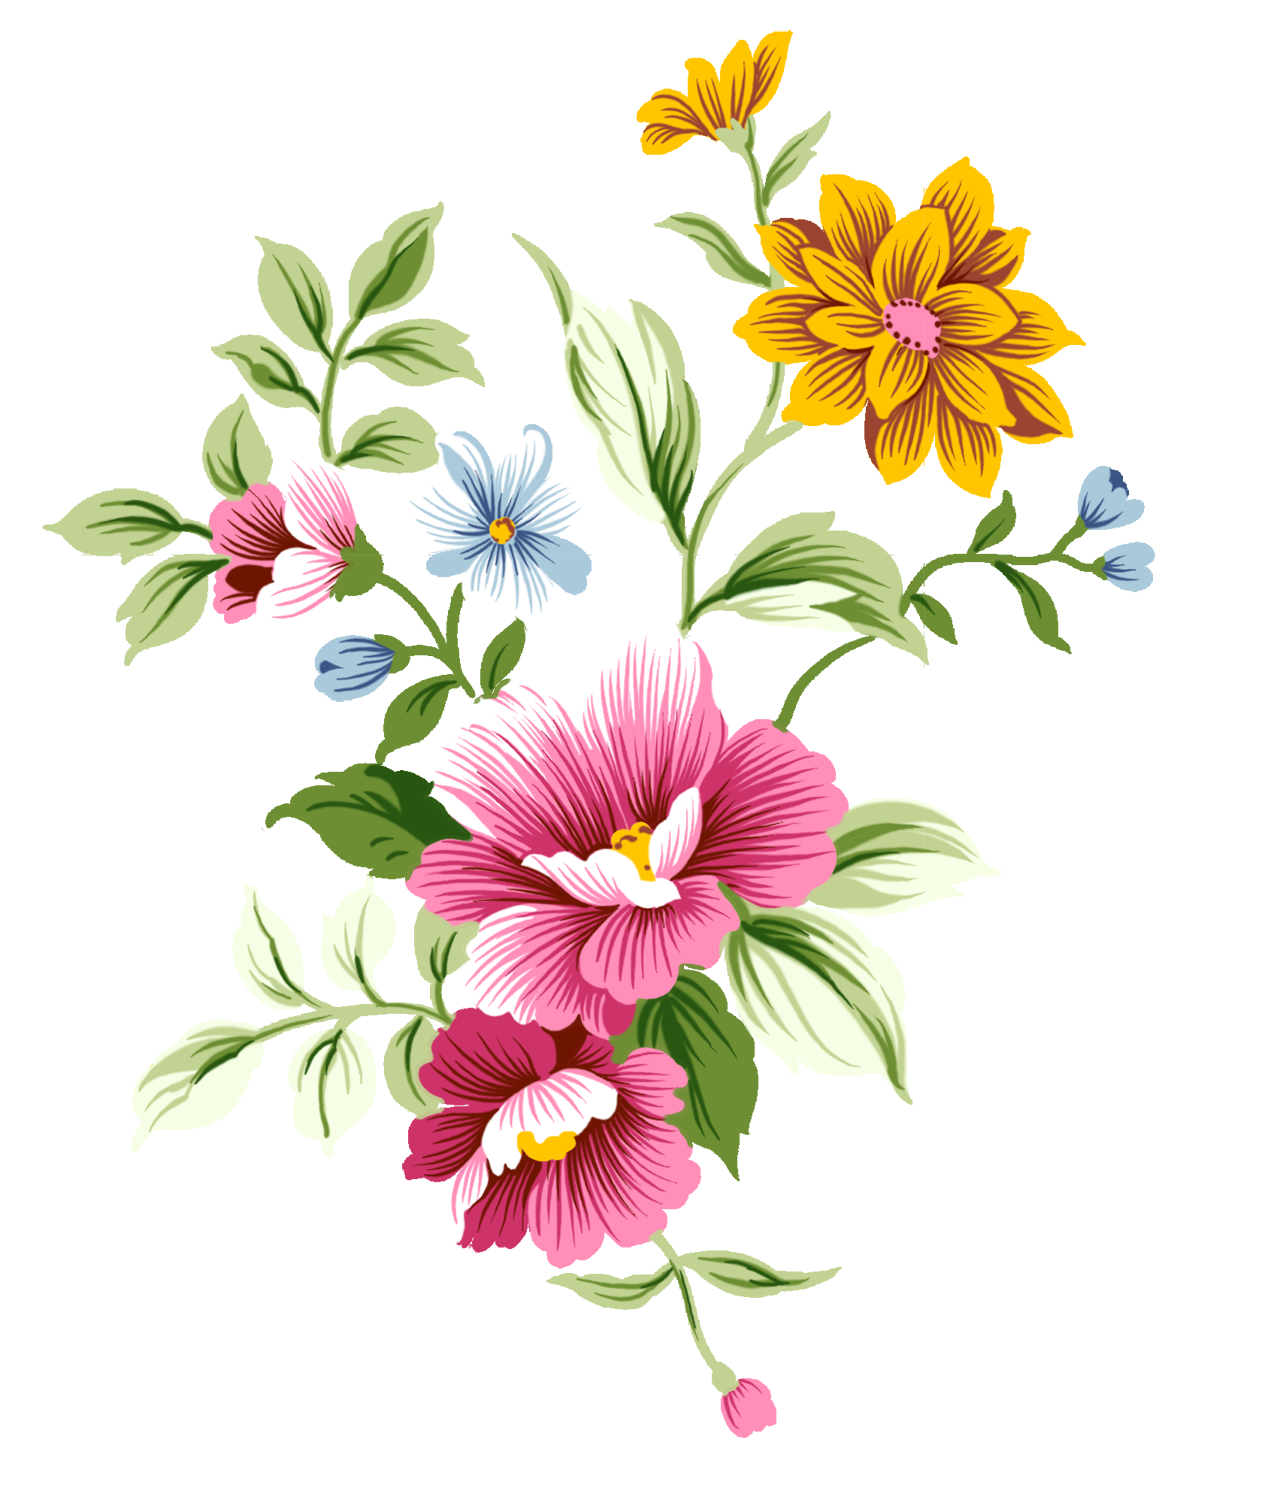 Flower transparent png. Abstract images all